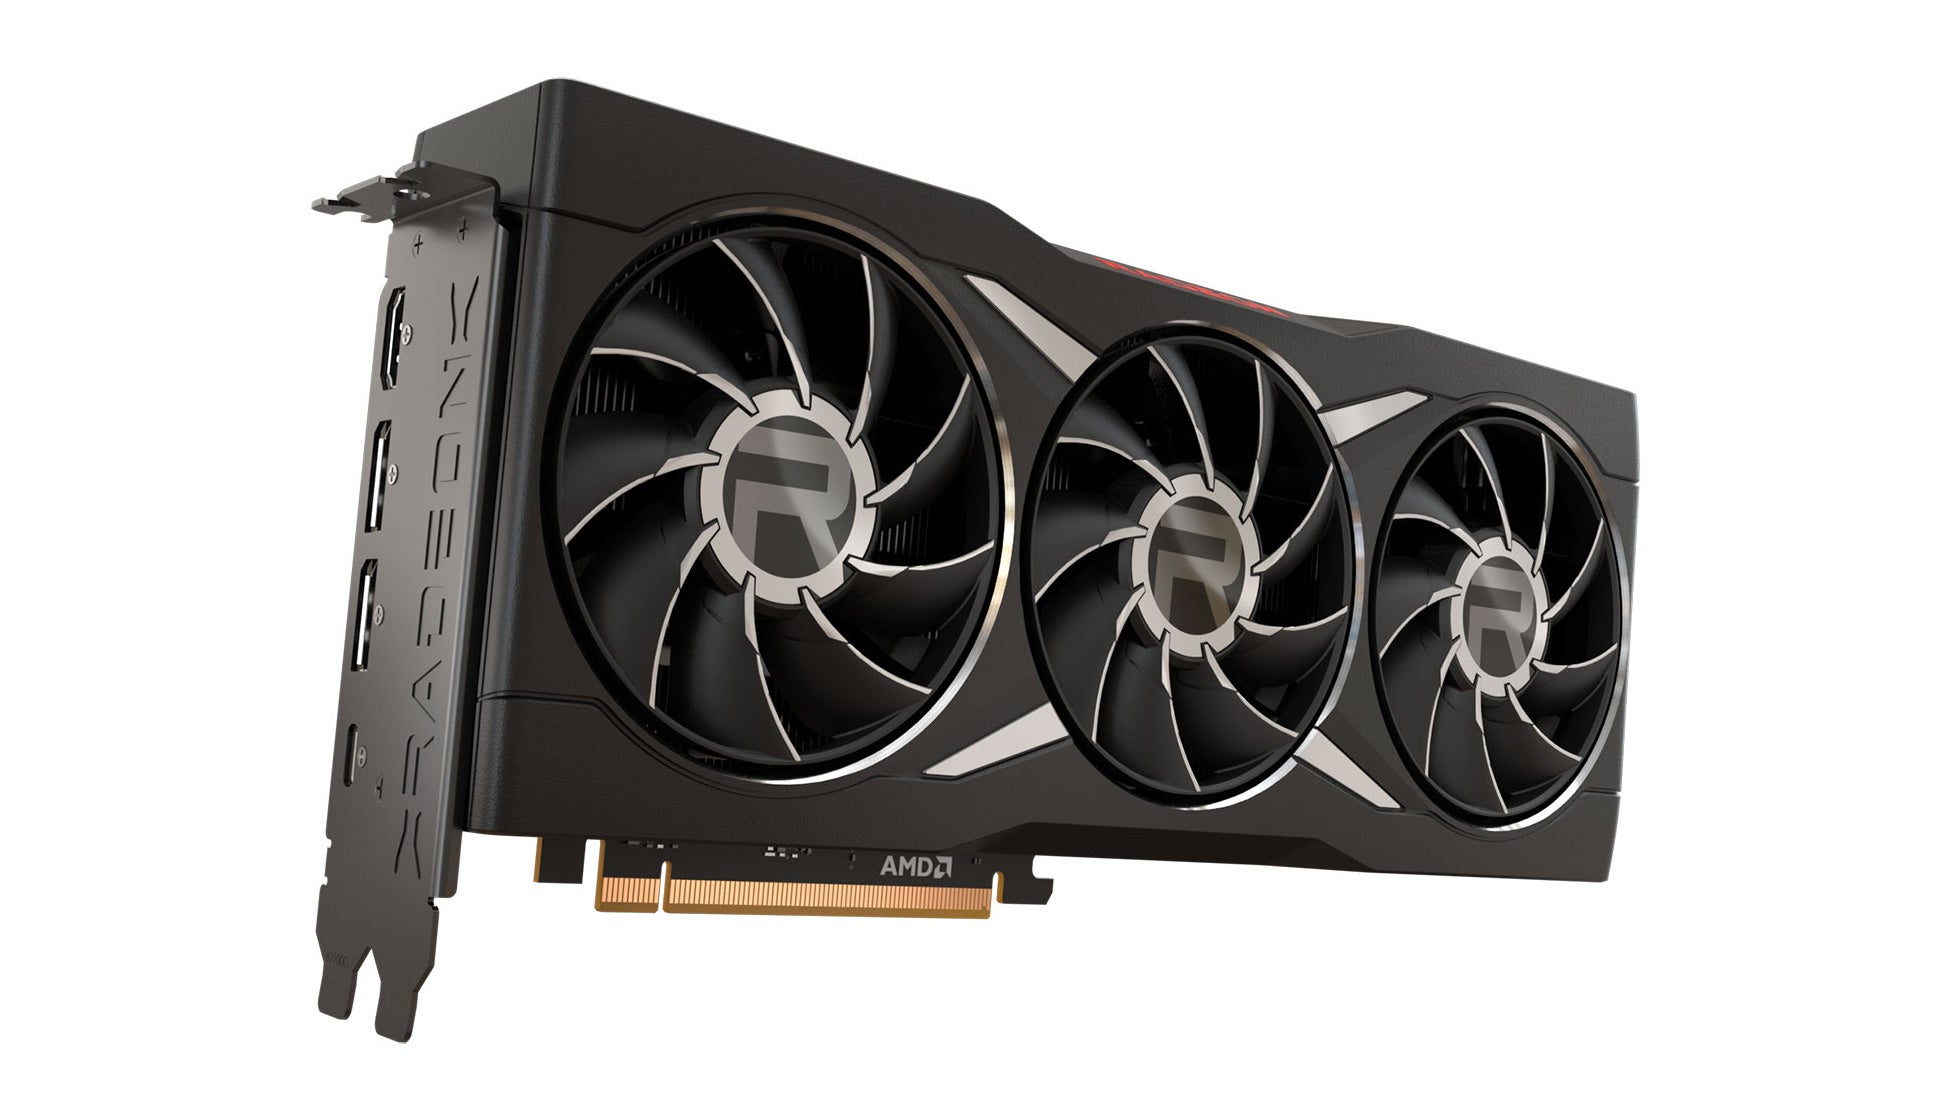 AMD's fastest GPU, the RX 6950 XT, is £850 at Scan today